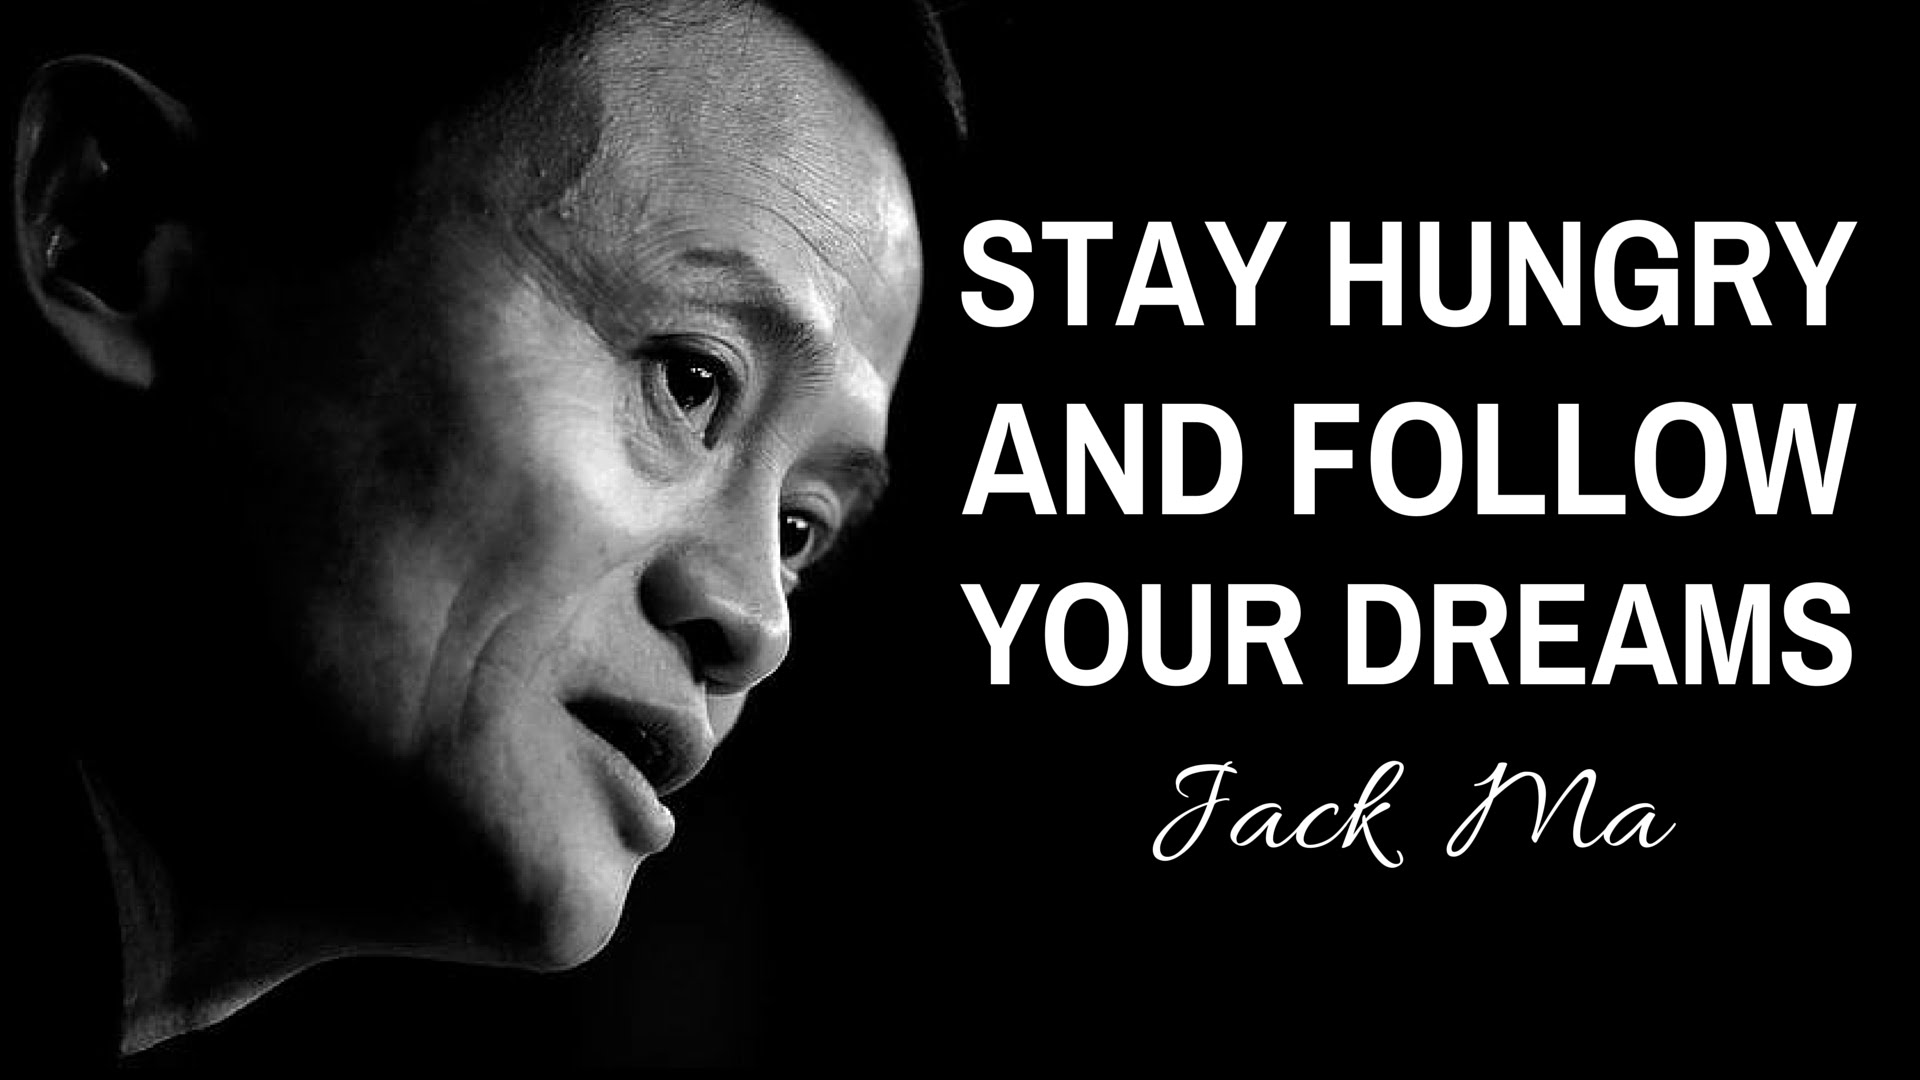 Quotes Of Jack Ma Inspiration - HD Wallpaper 